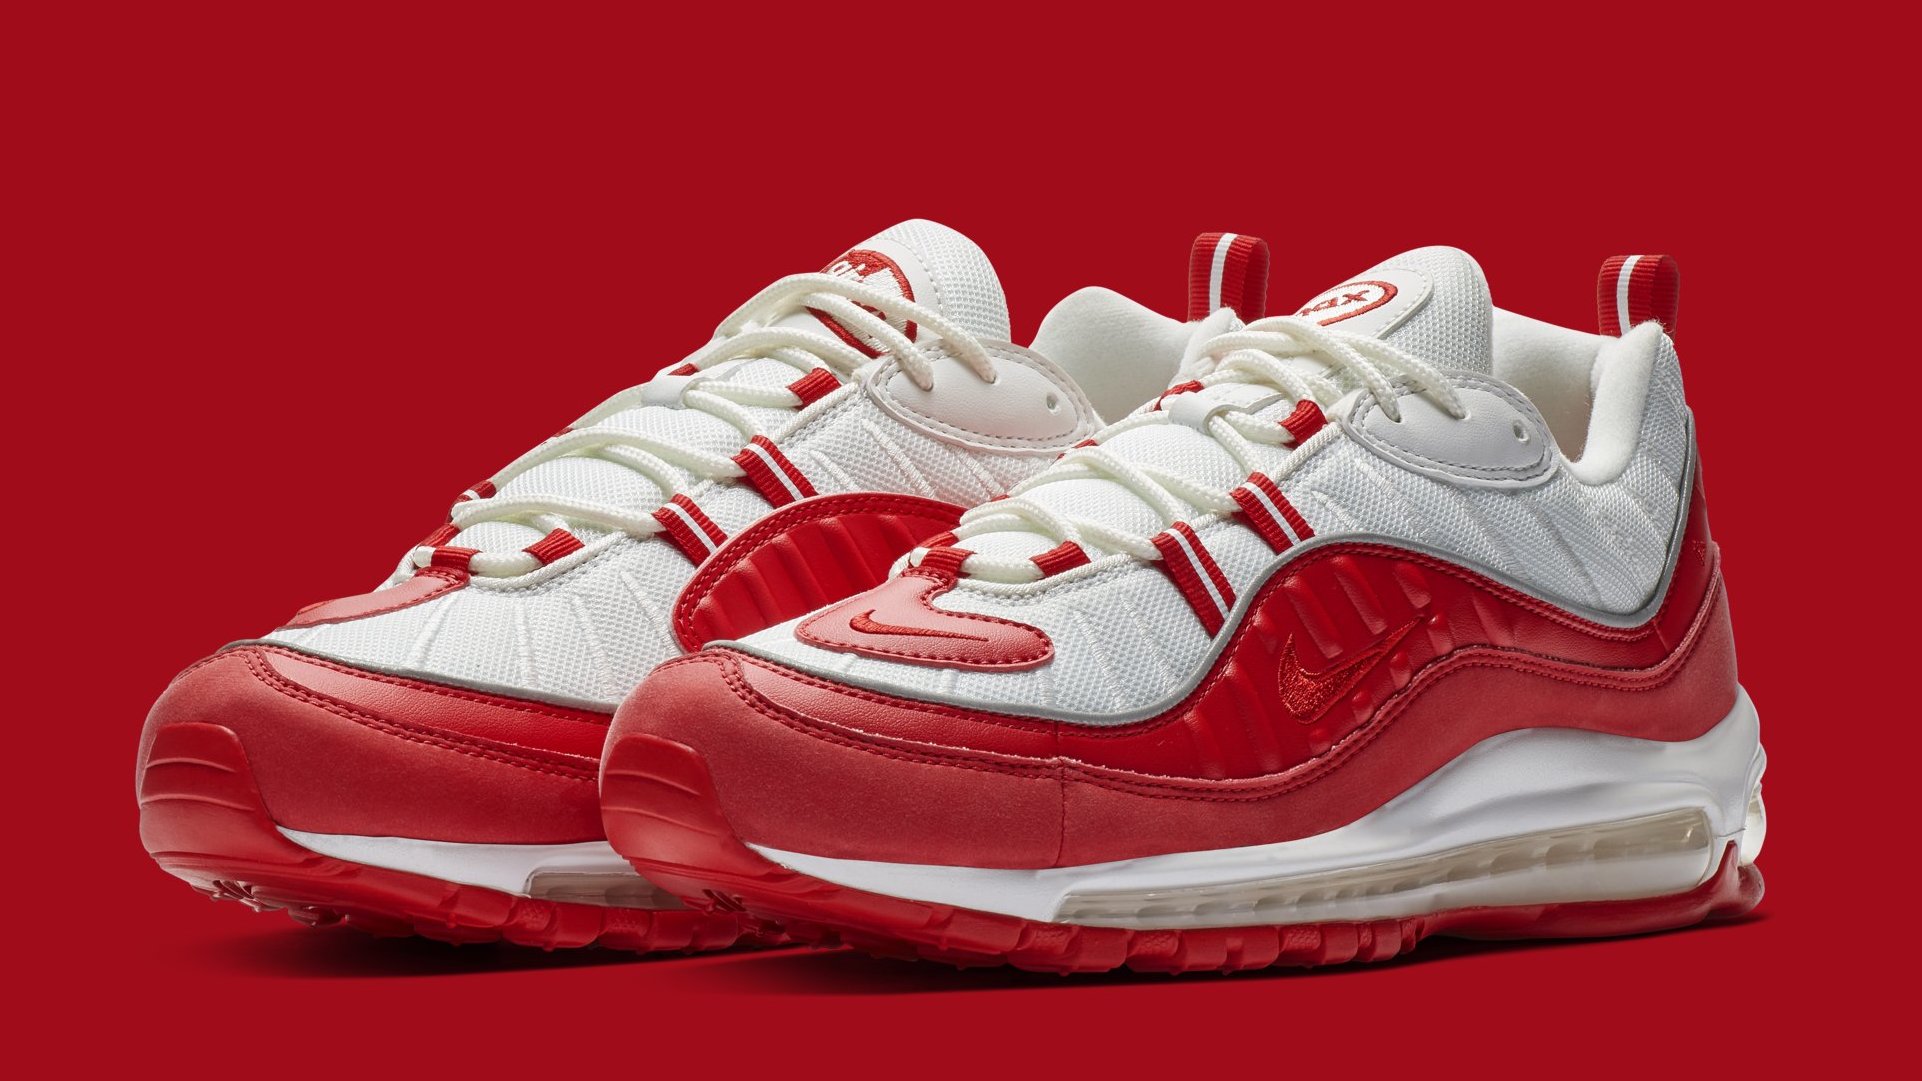 Nike Air 98 'University Red' 640744-602 Release | Sole